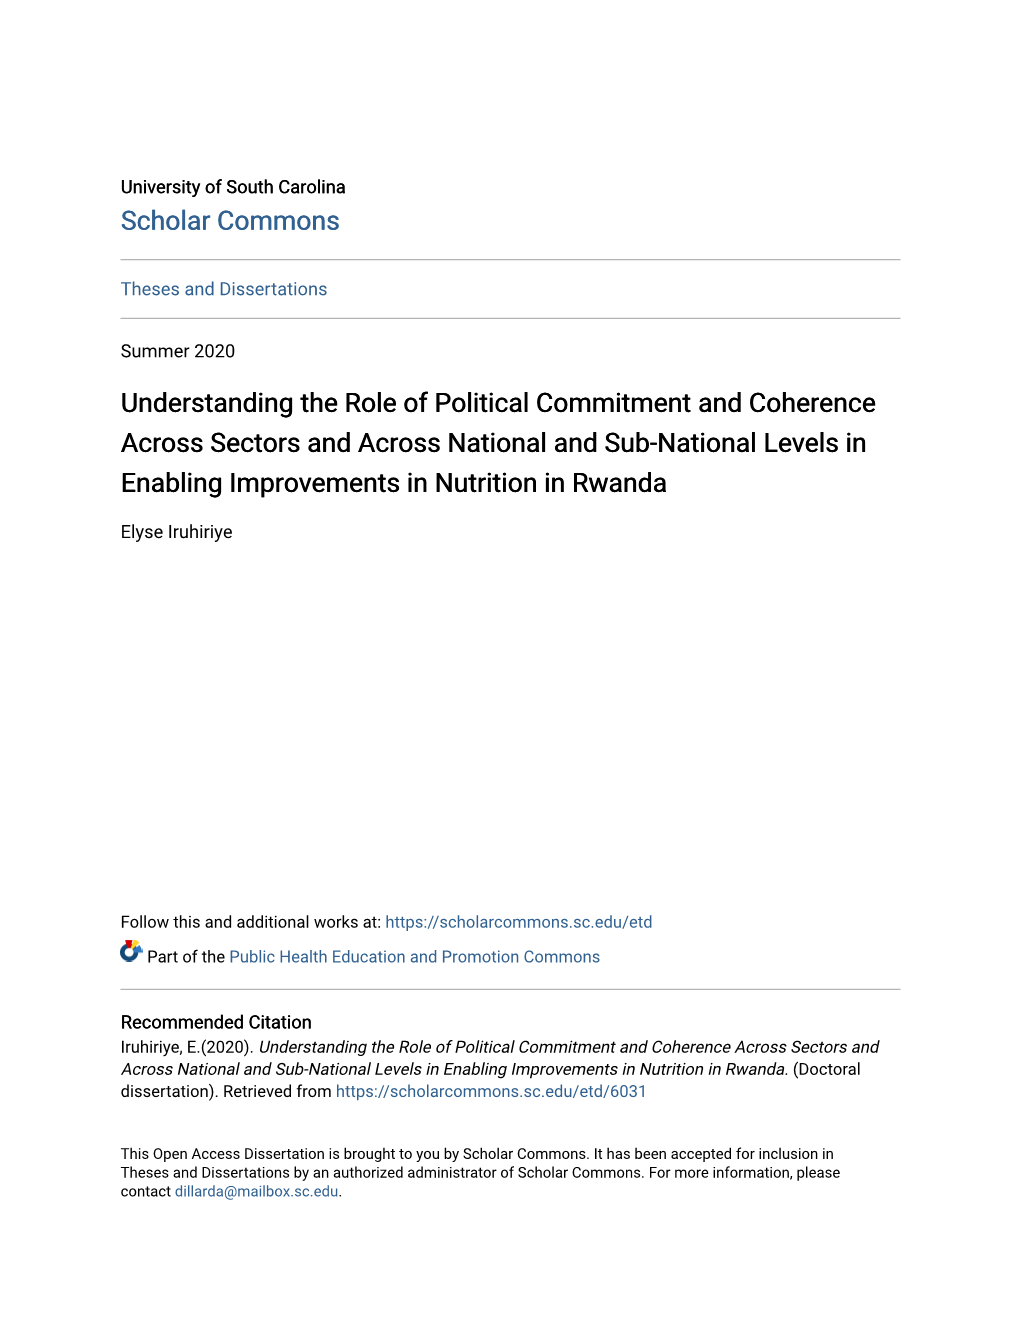 Understanding the Role of Political Commitment and Coherence